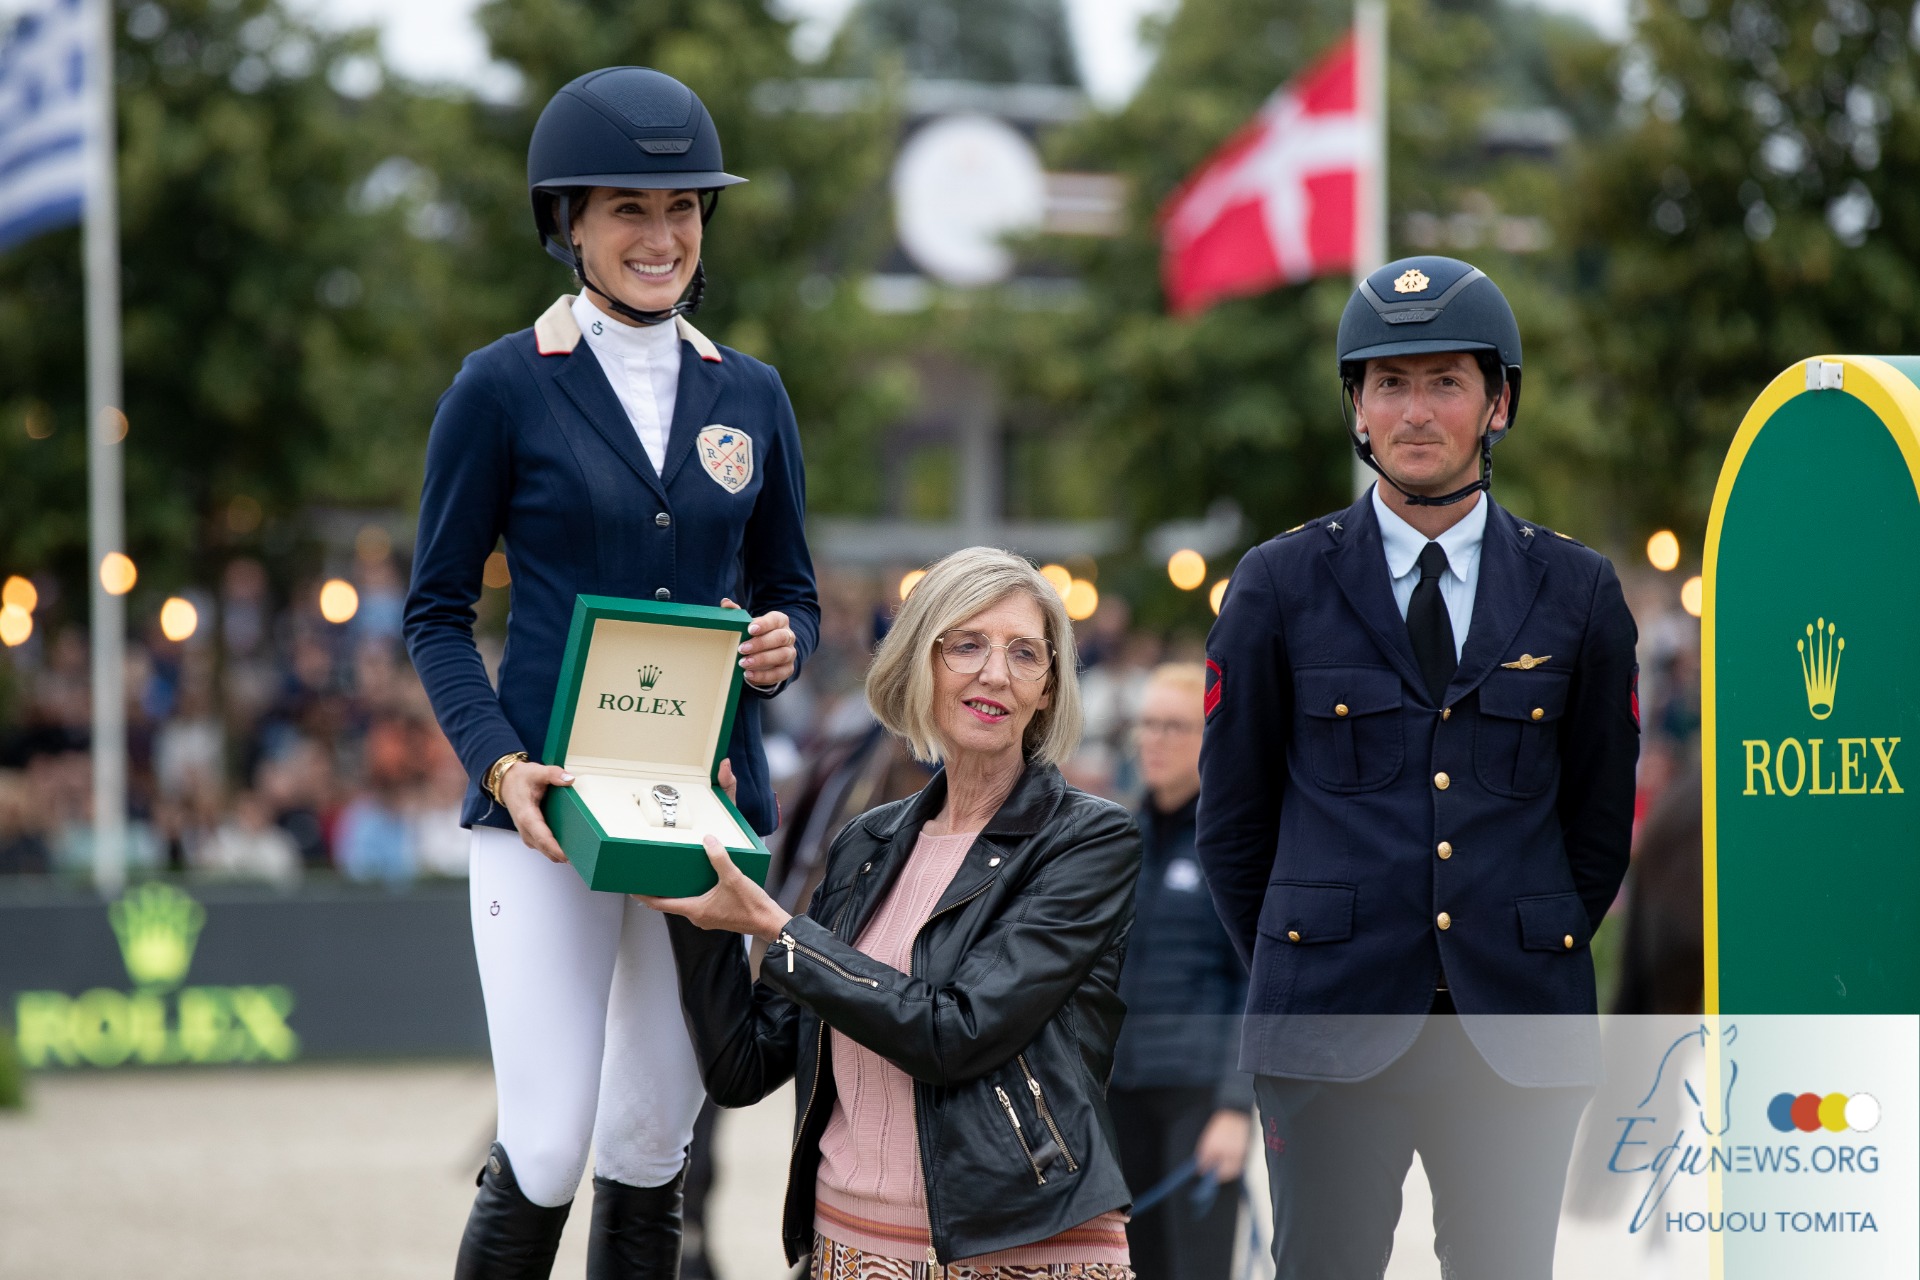 Jessica Springsteen: "It would be great to win the Grand Prix again this year..."